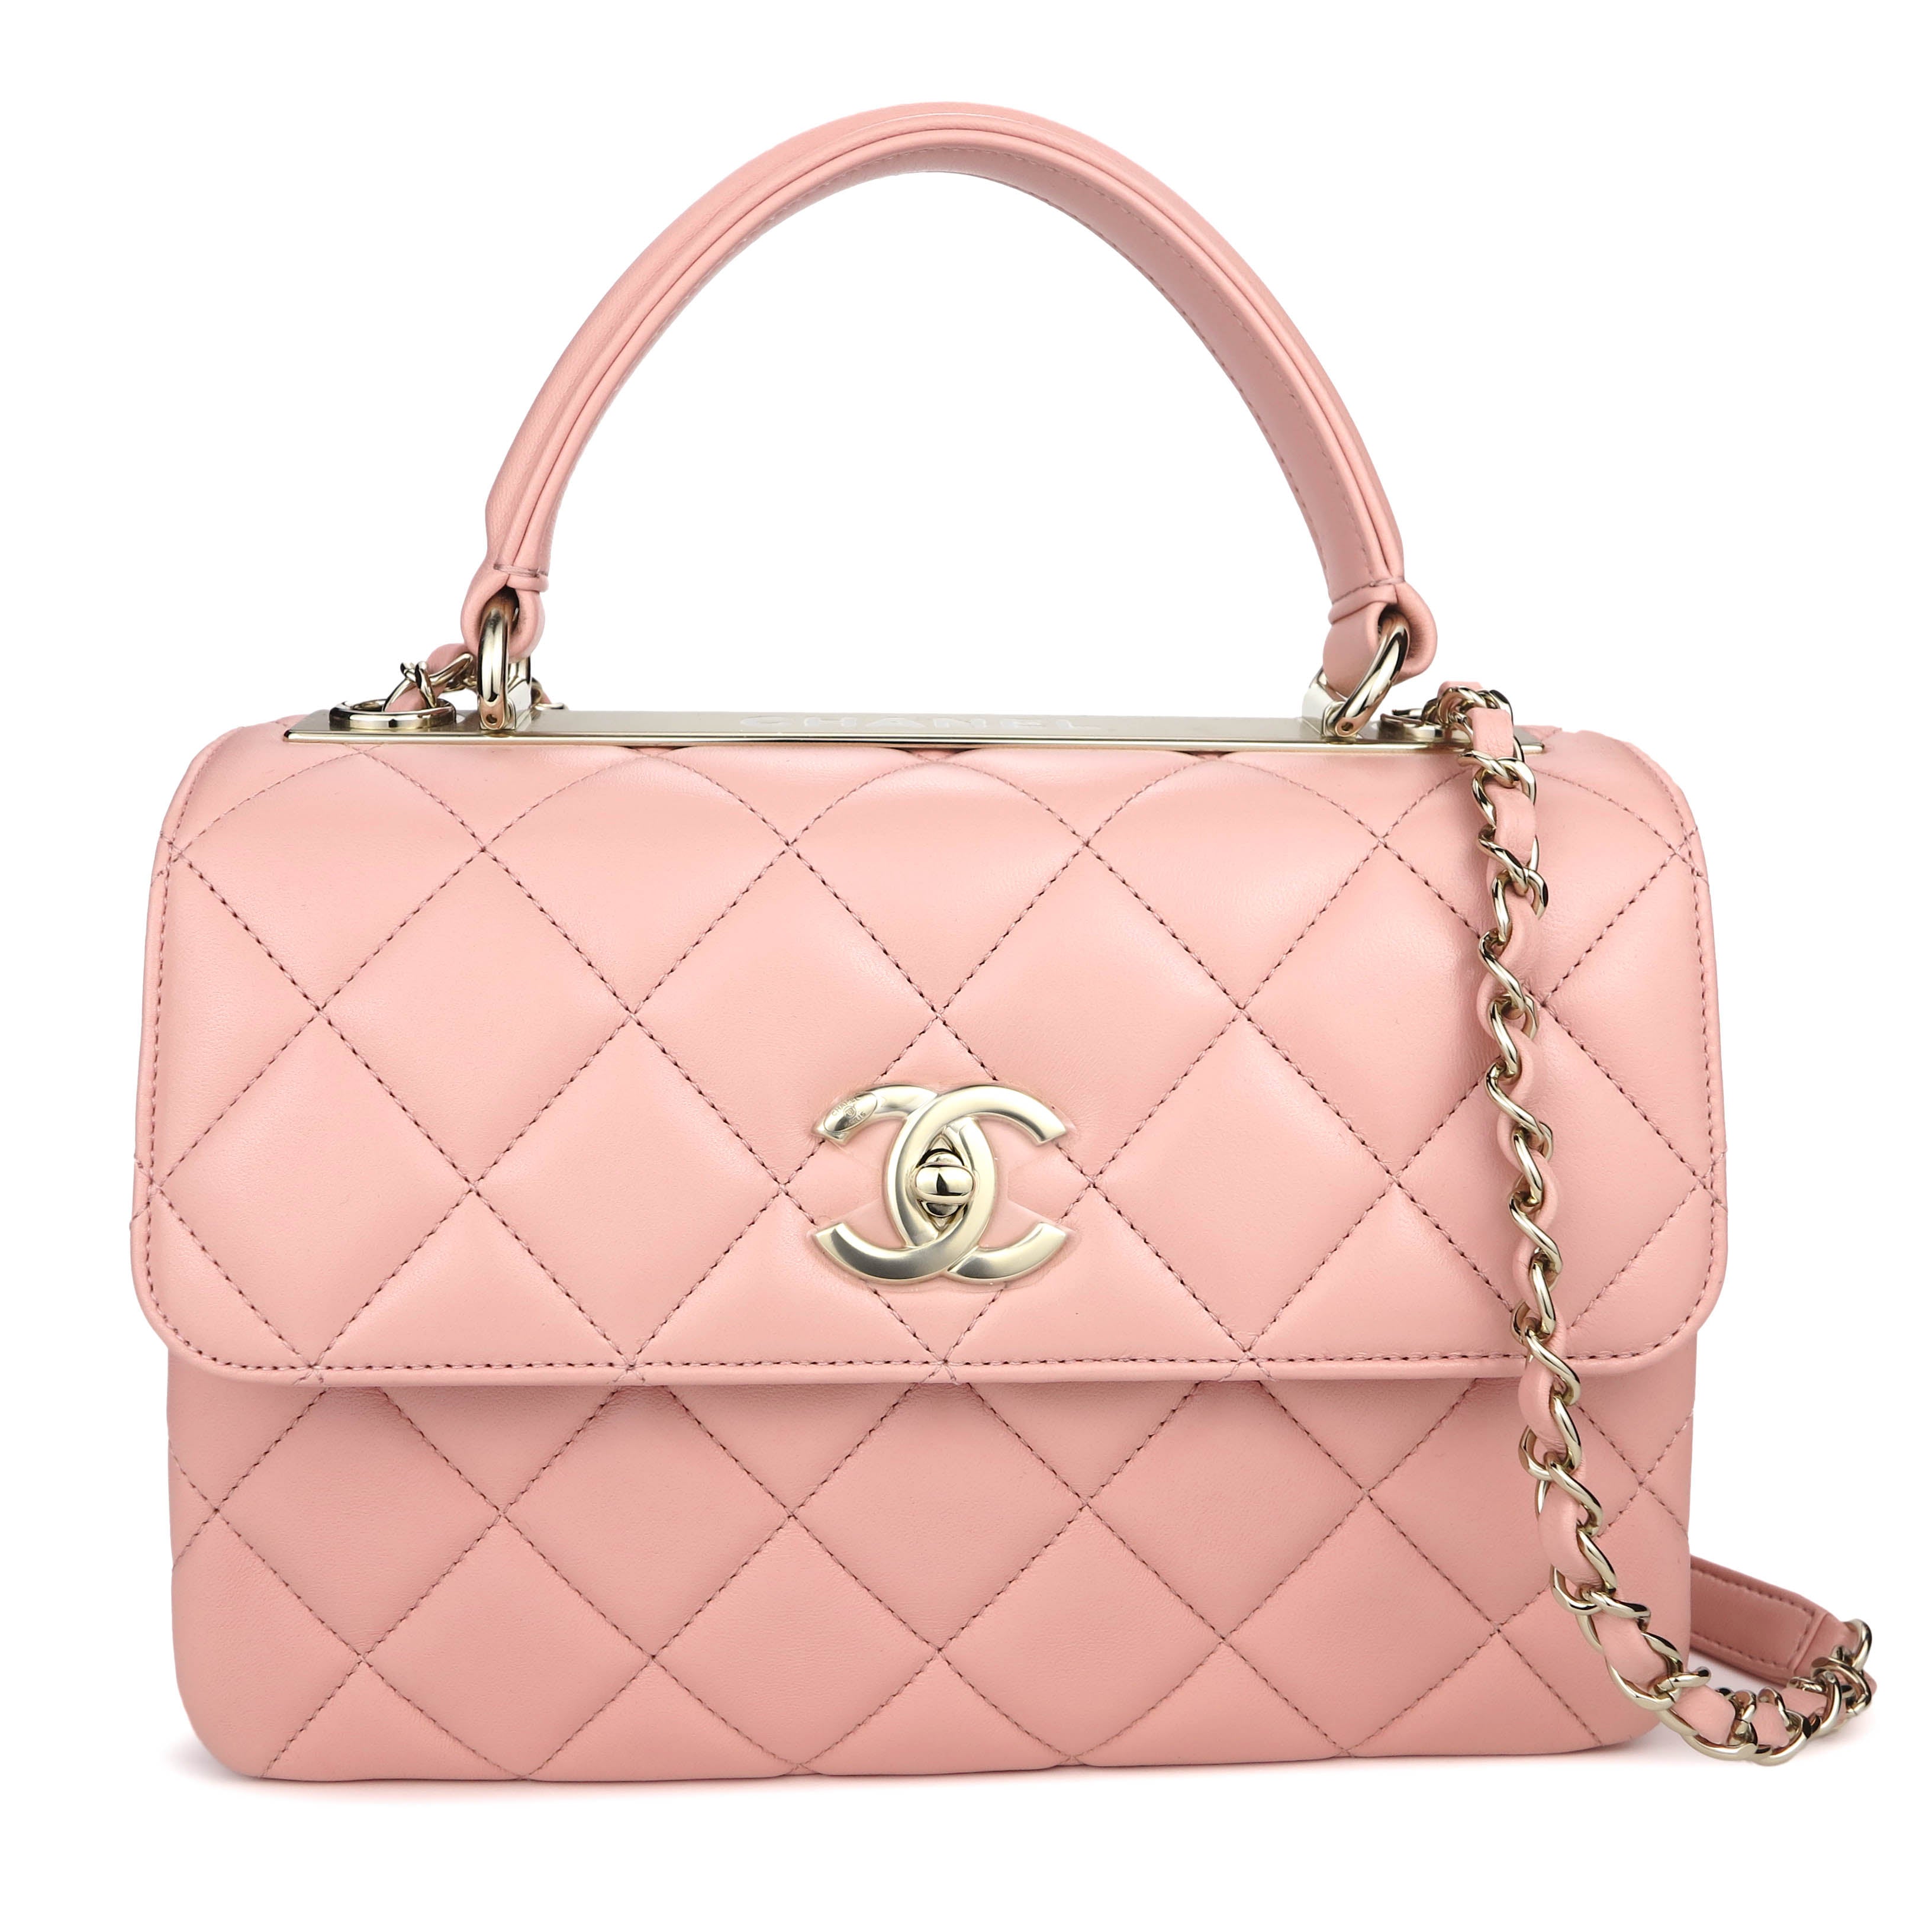 CHANEL Small Trendy CC Flap Bag with Top Handle in Pink